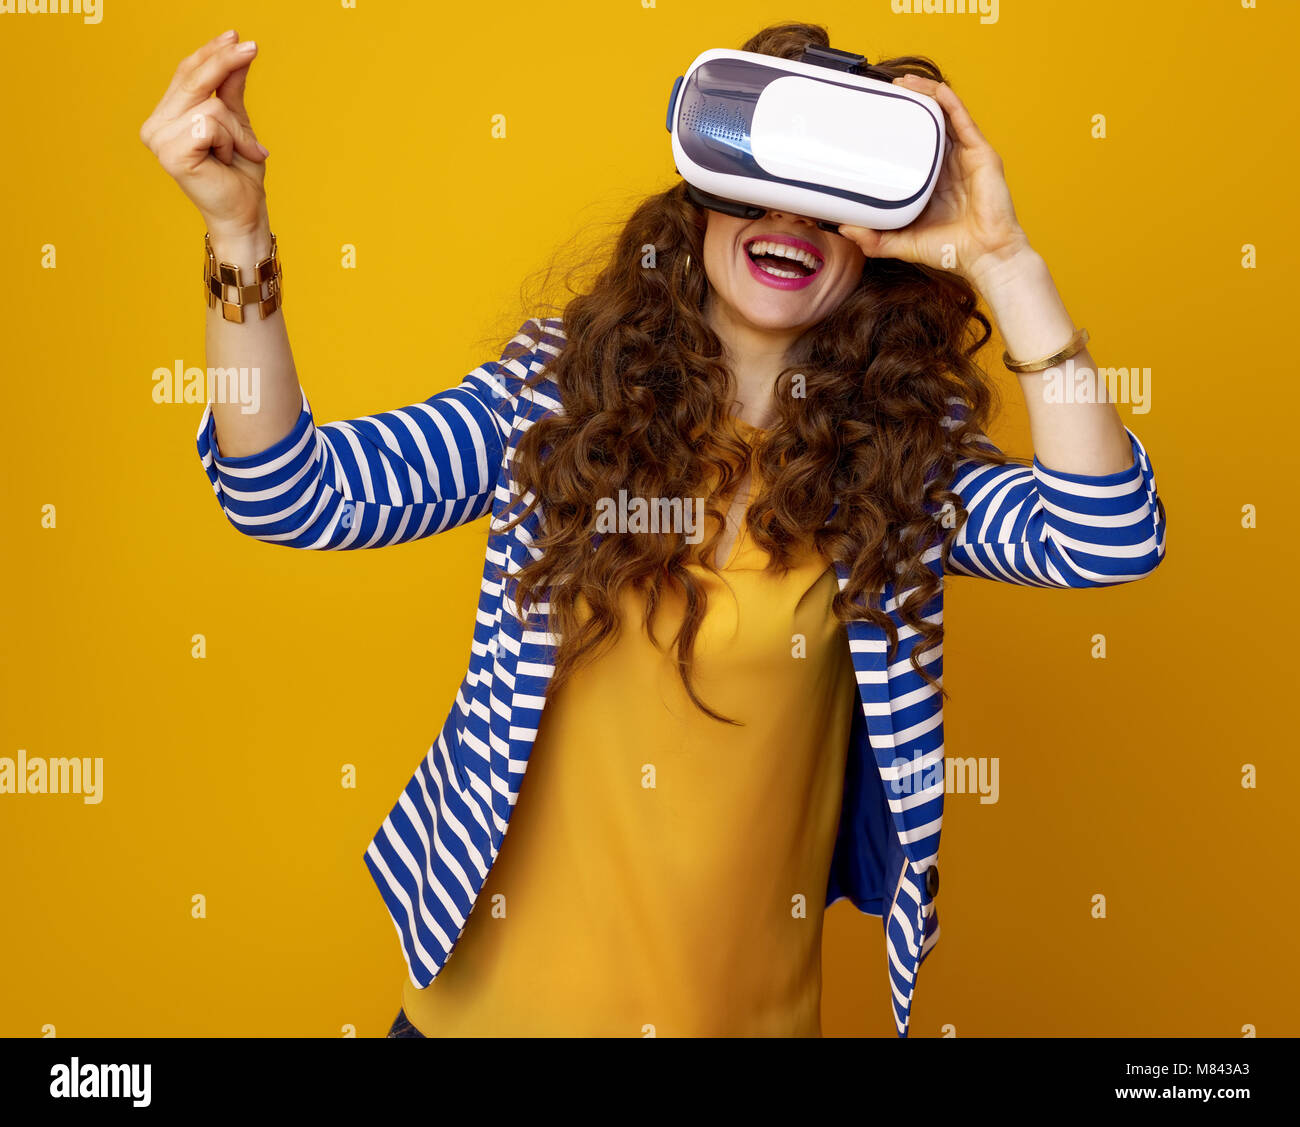 happy stylish woman with long wavy brunette hair against yellow background using virtual reality gear and snapping fingers Stock Photo